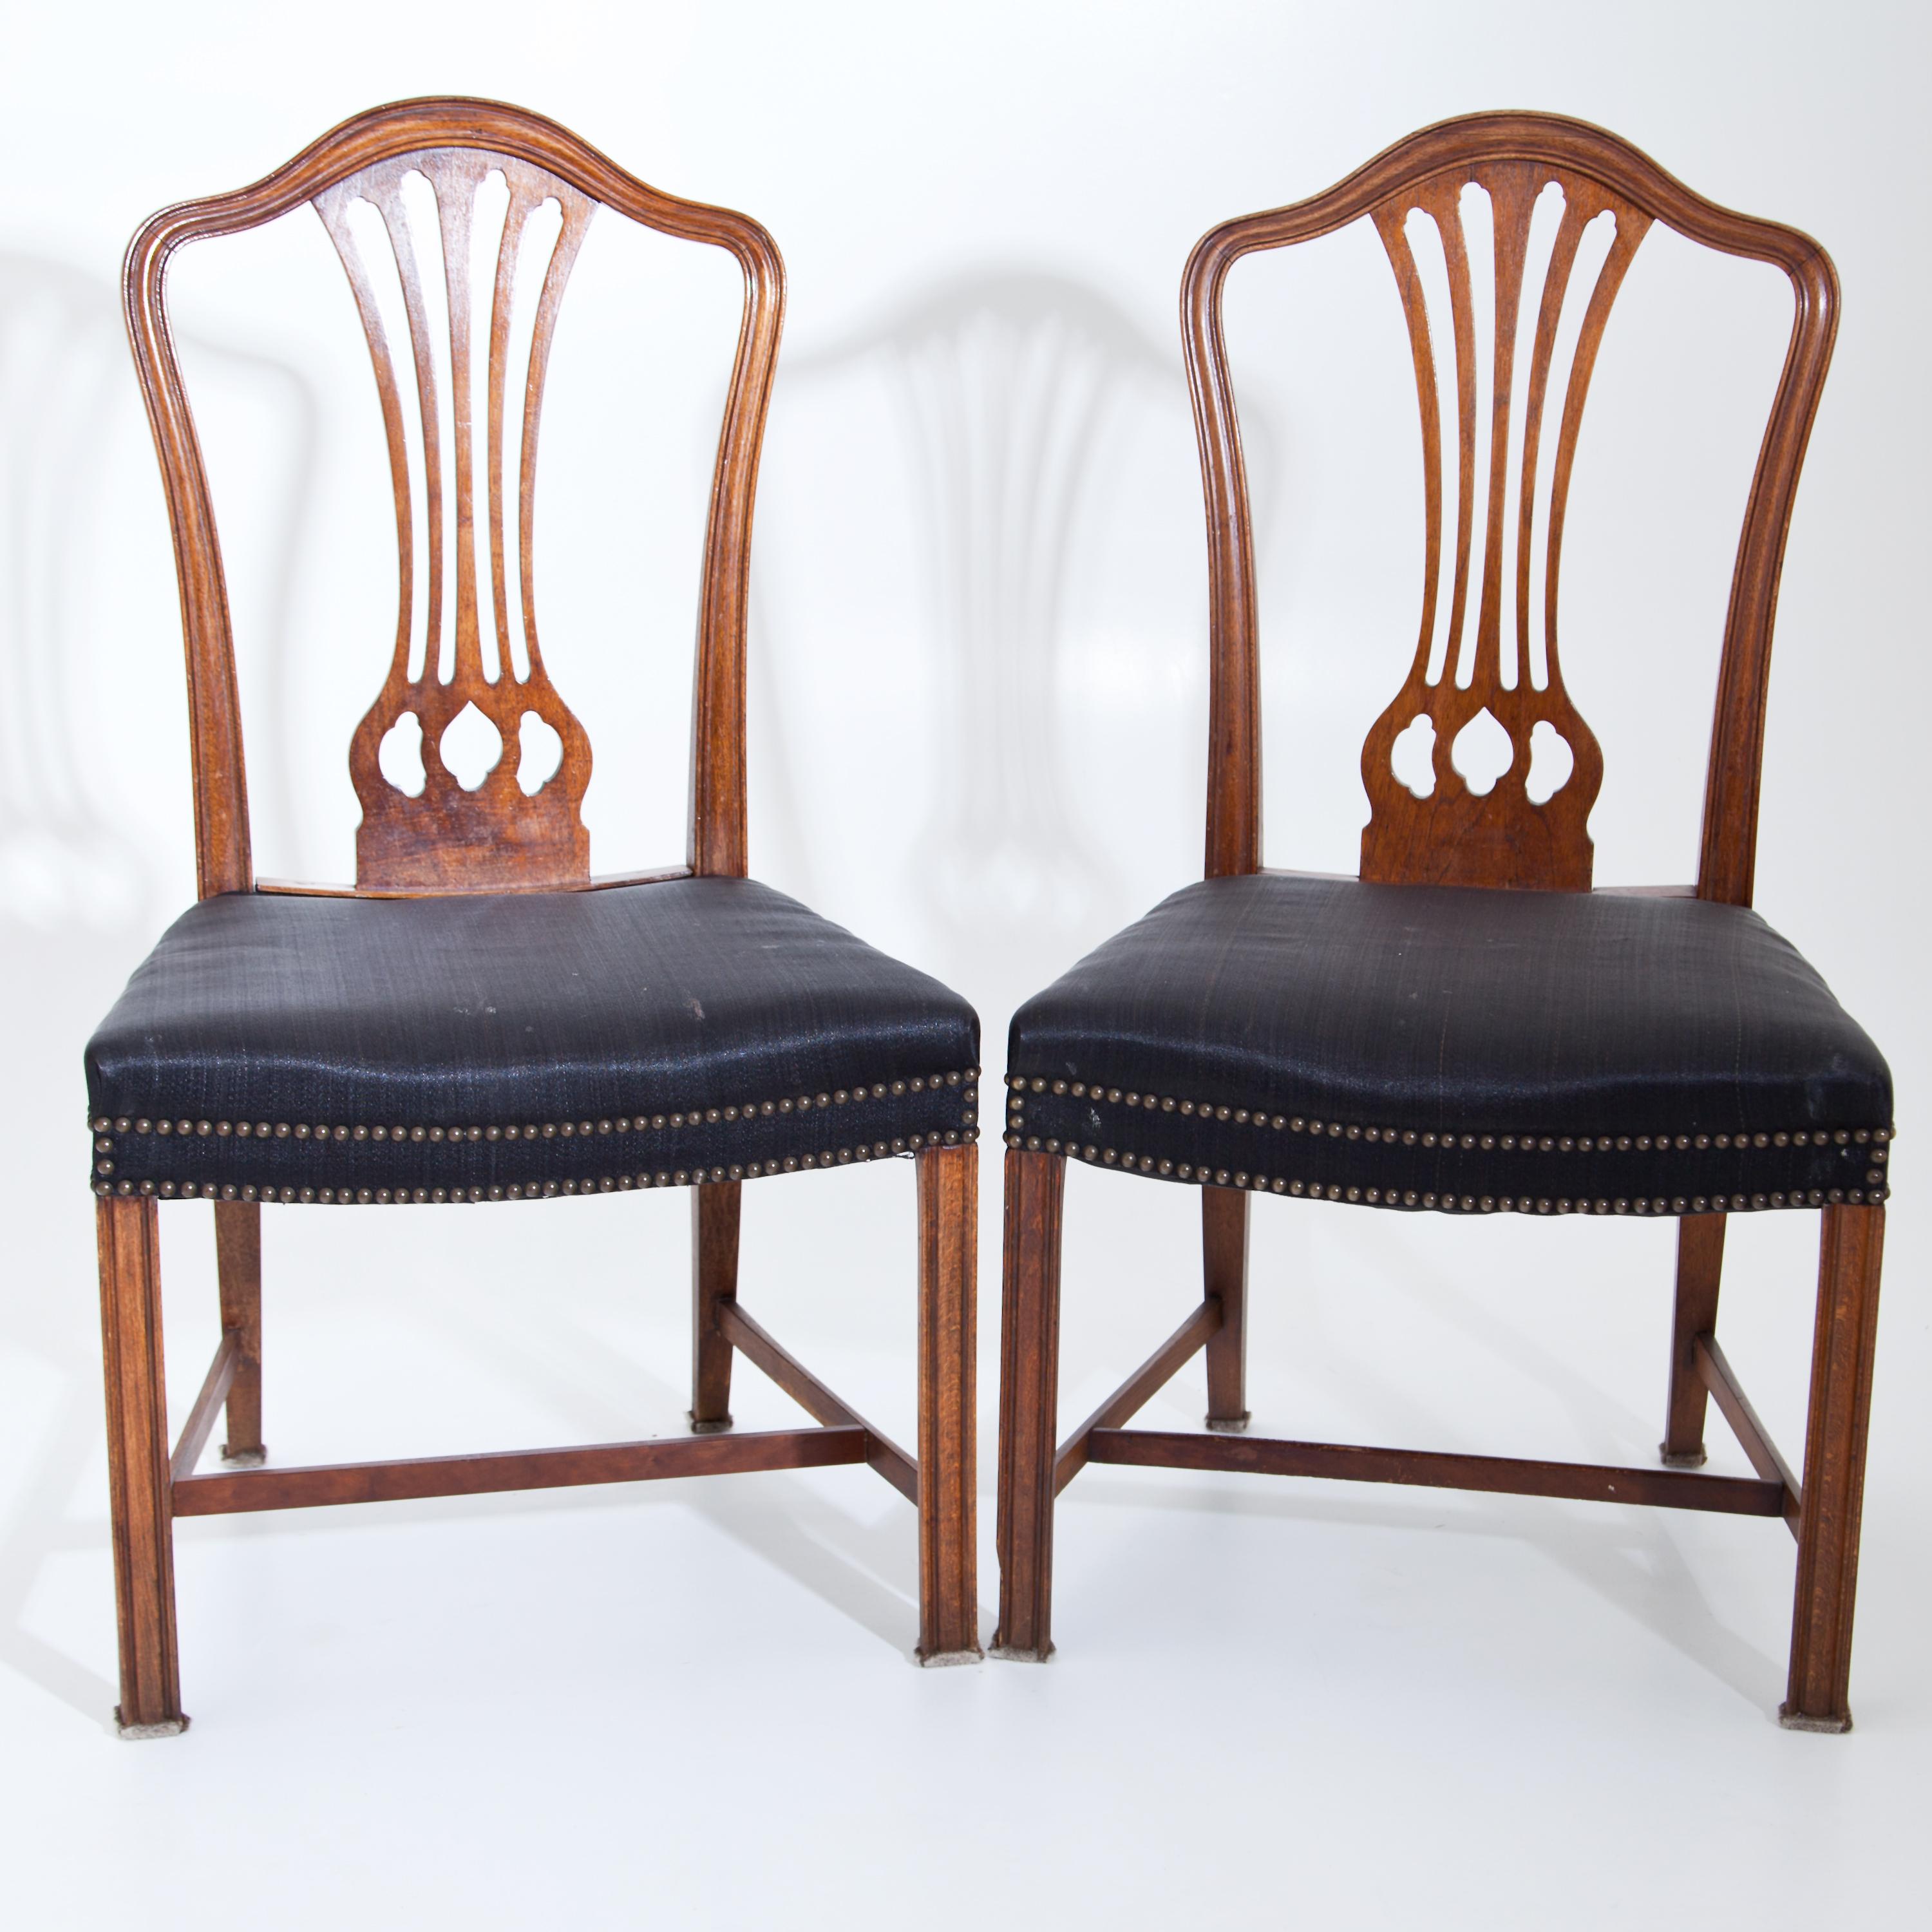 Mahogany Dining Room Chairs after Chippendale, England, circa 1800 1